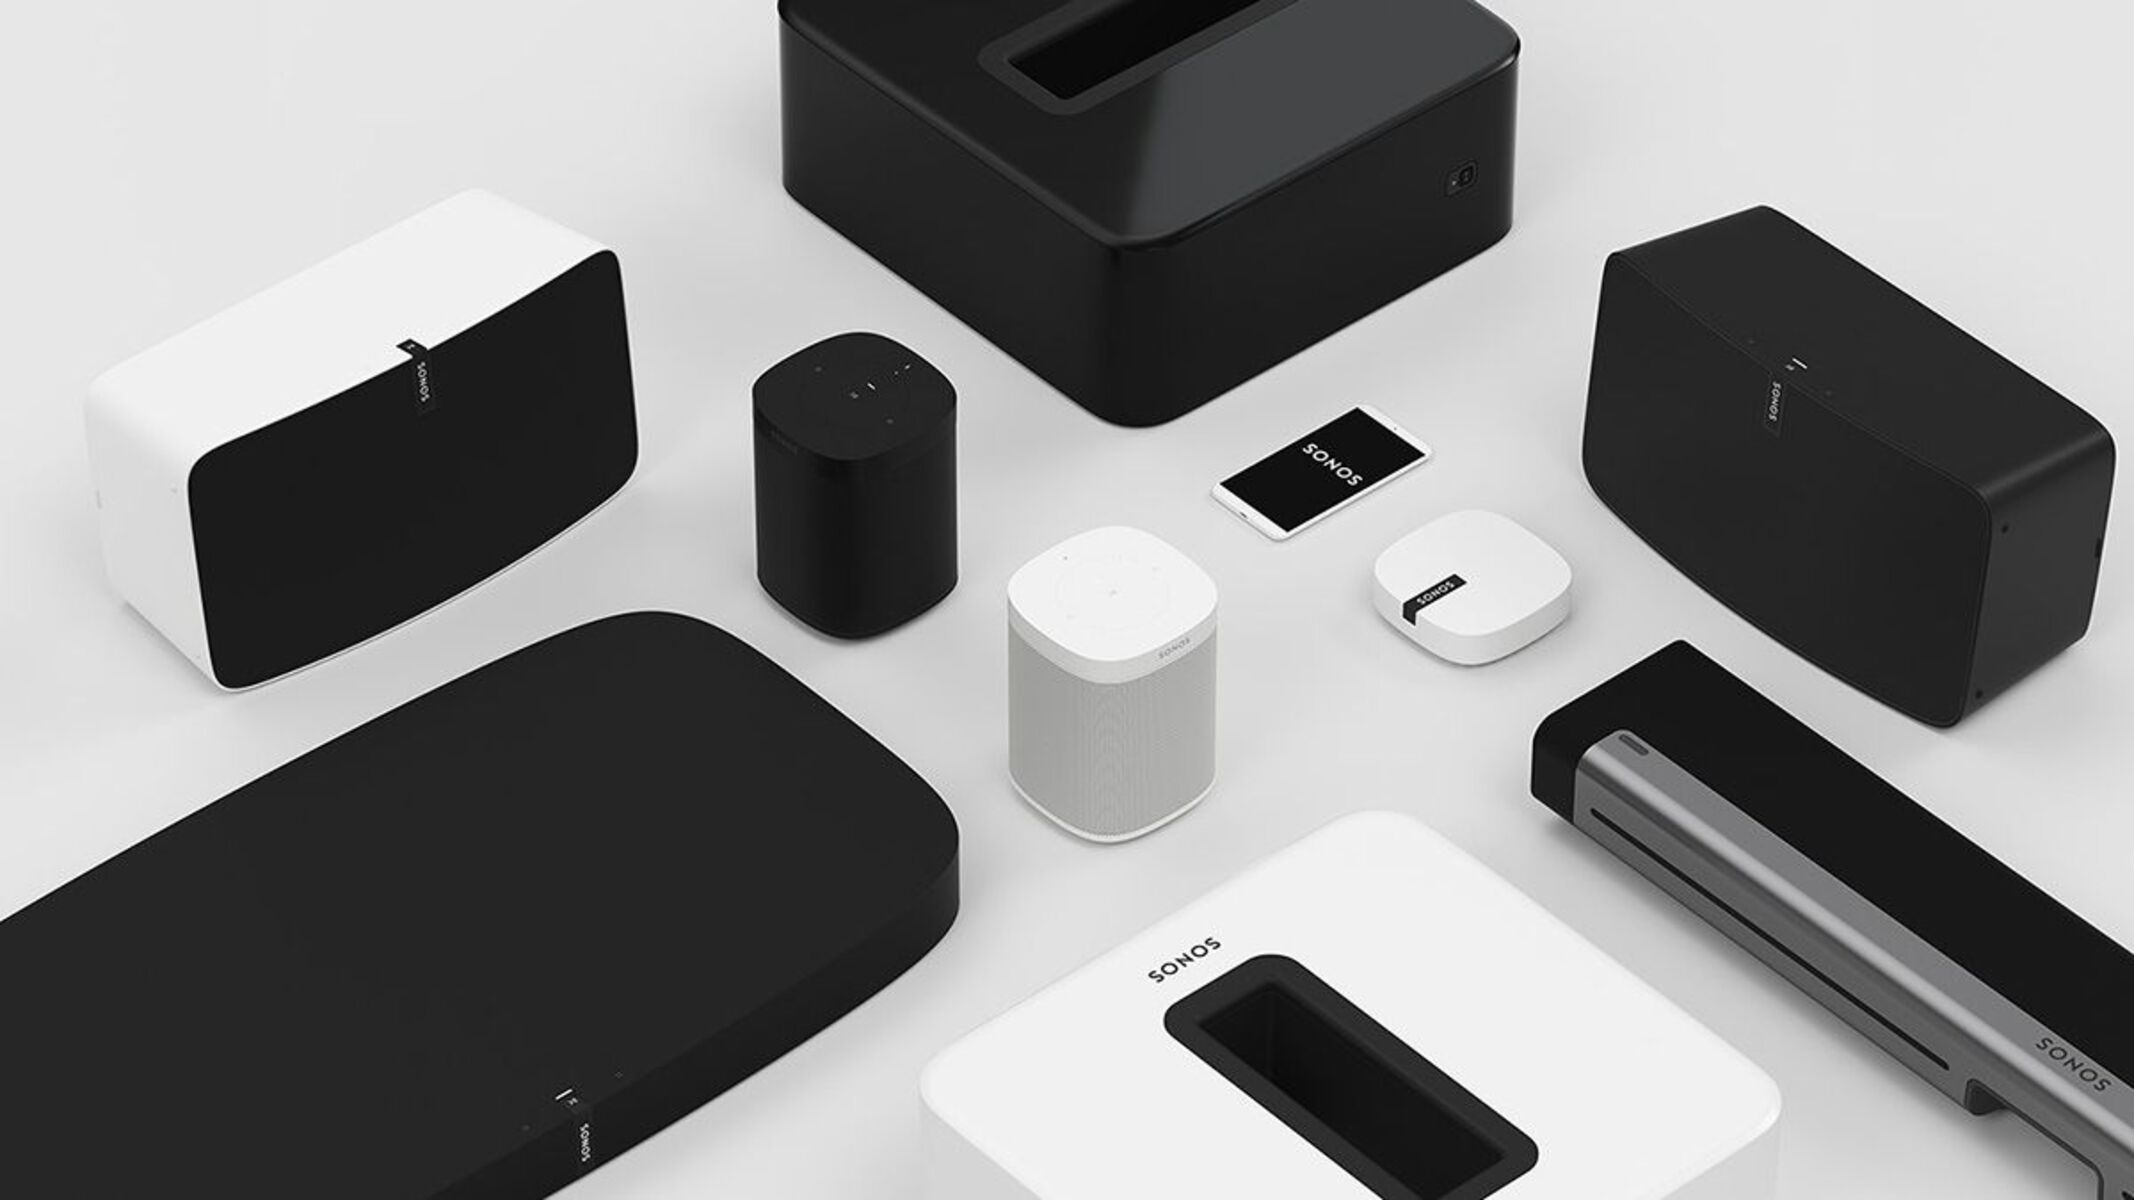 A Sonos Home Music Streaming System Overview